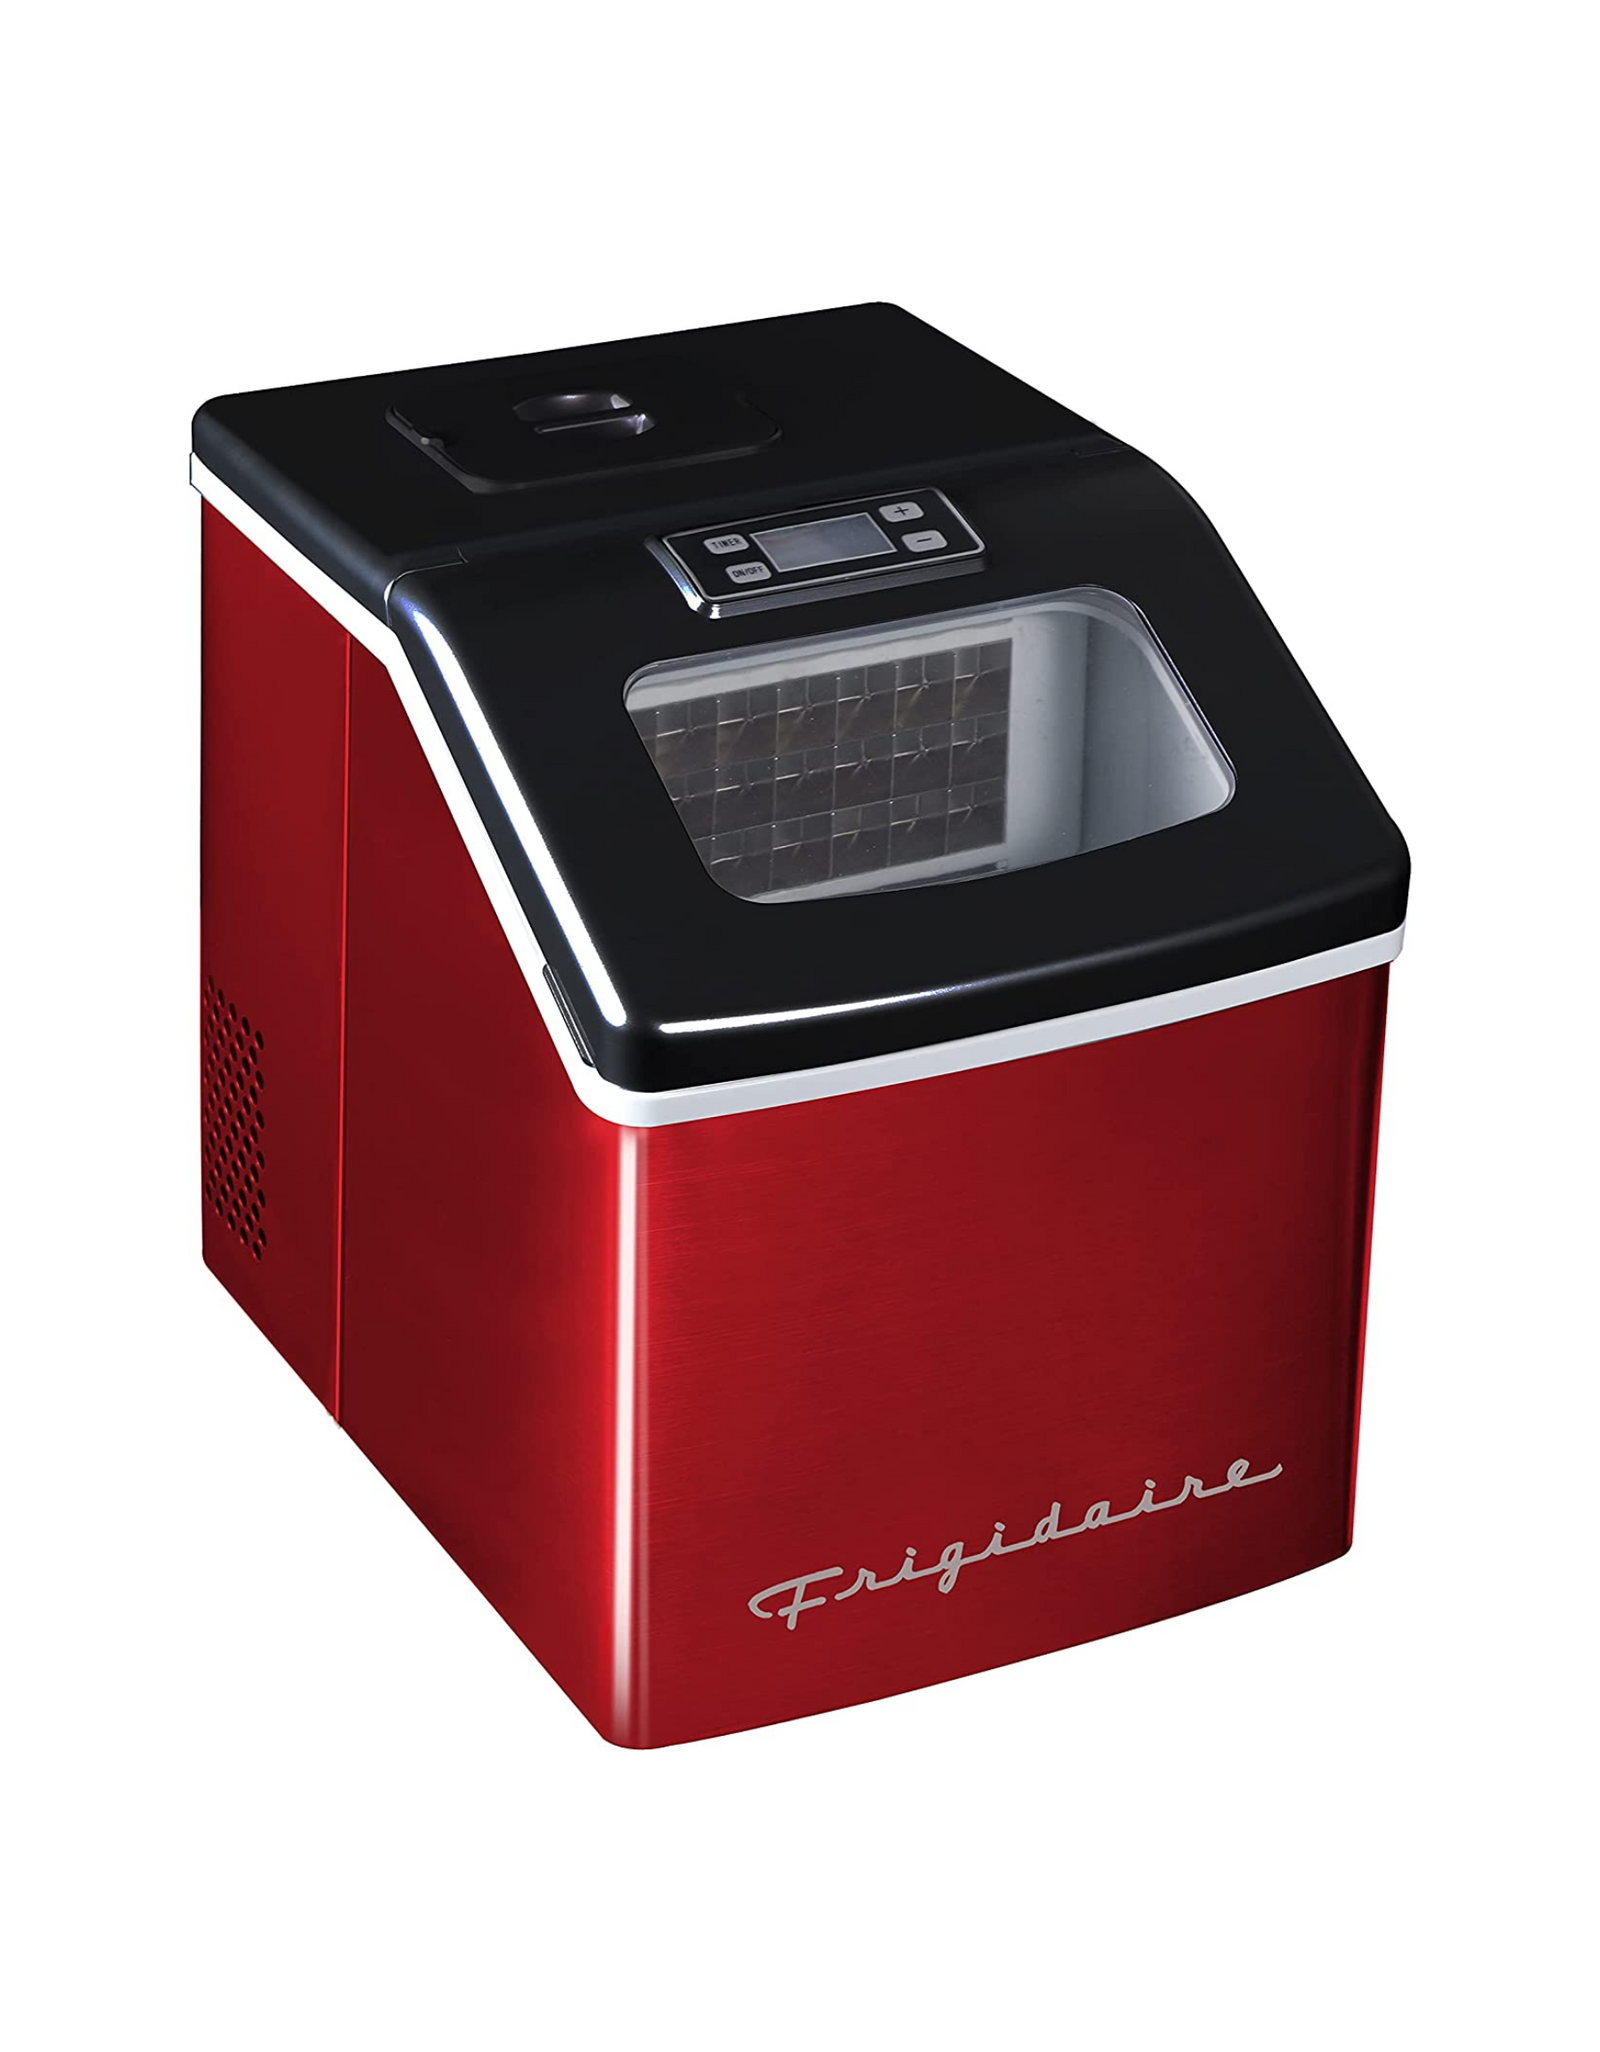 Frigidaire EFIC452-SSRED Extra Large Ice Maker, Stainless, Red Steel